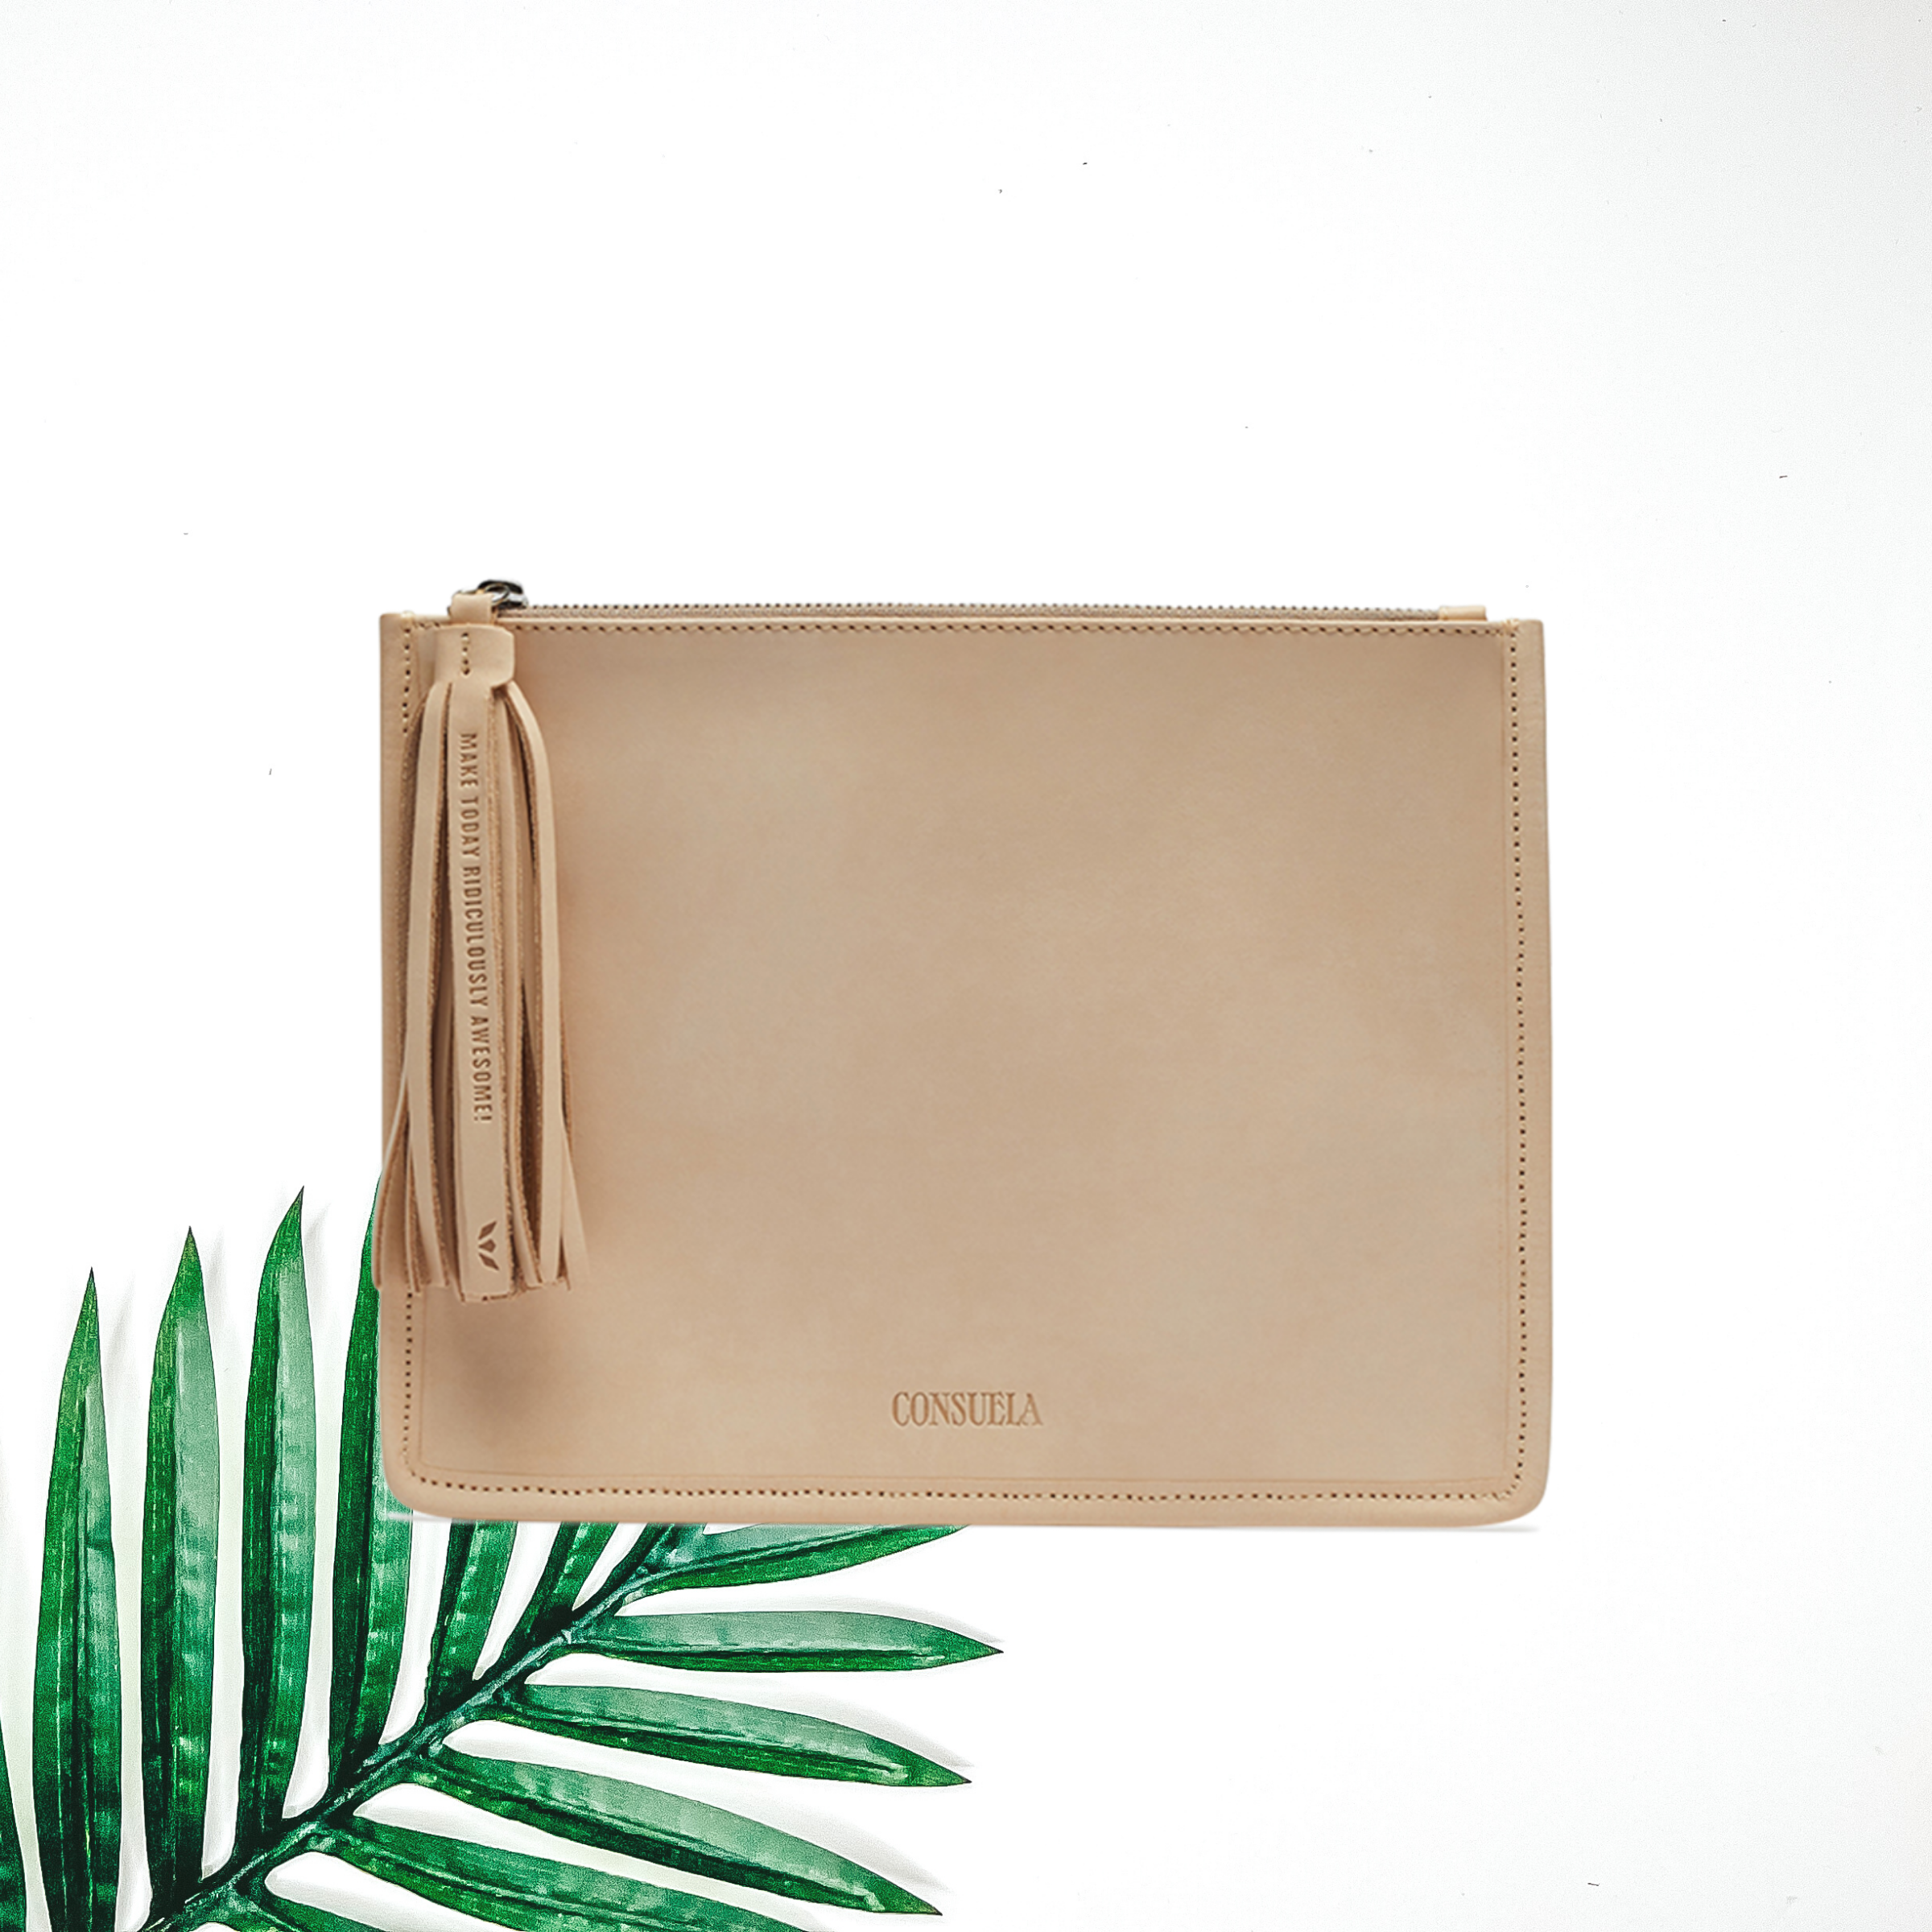 Centered in the picture is a pouch in nude leather. To the left of the pouch is a palm leaf, all on a white background.